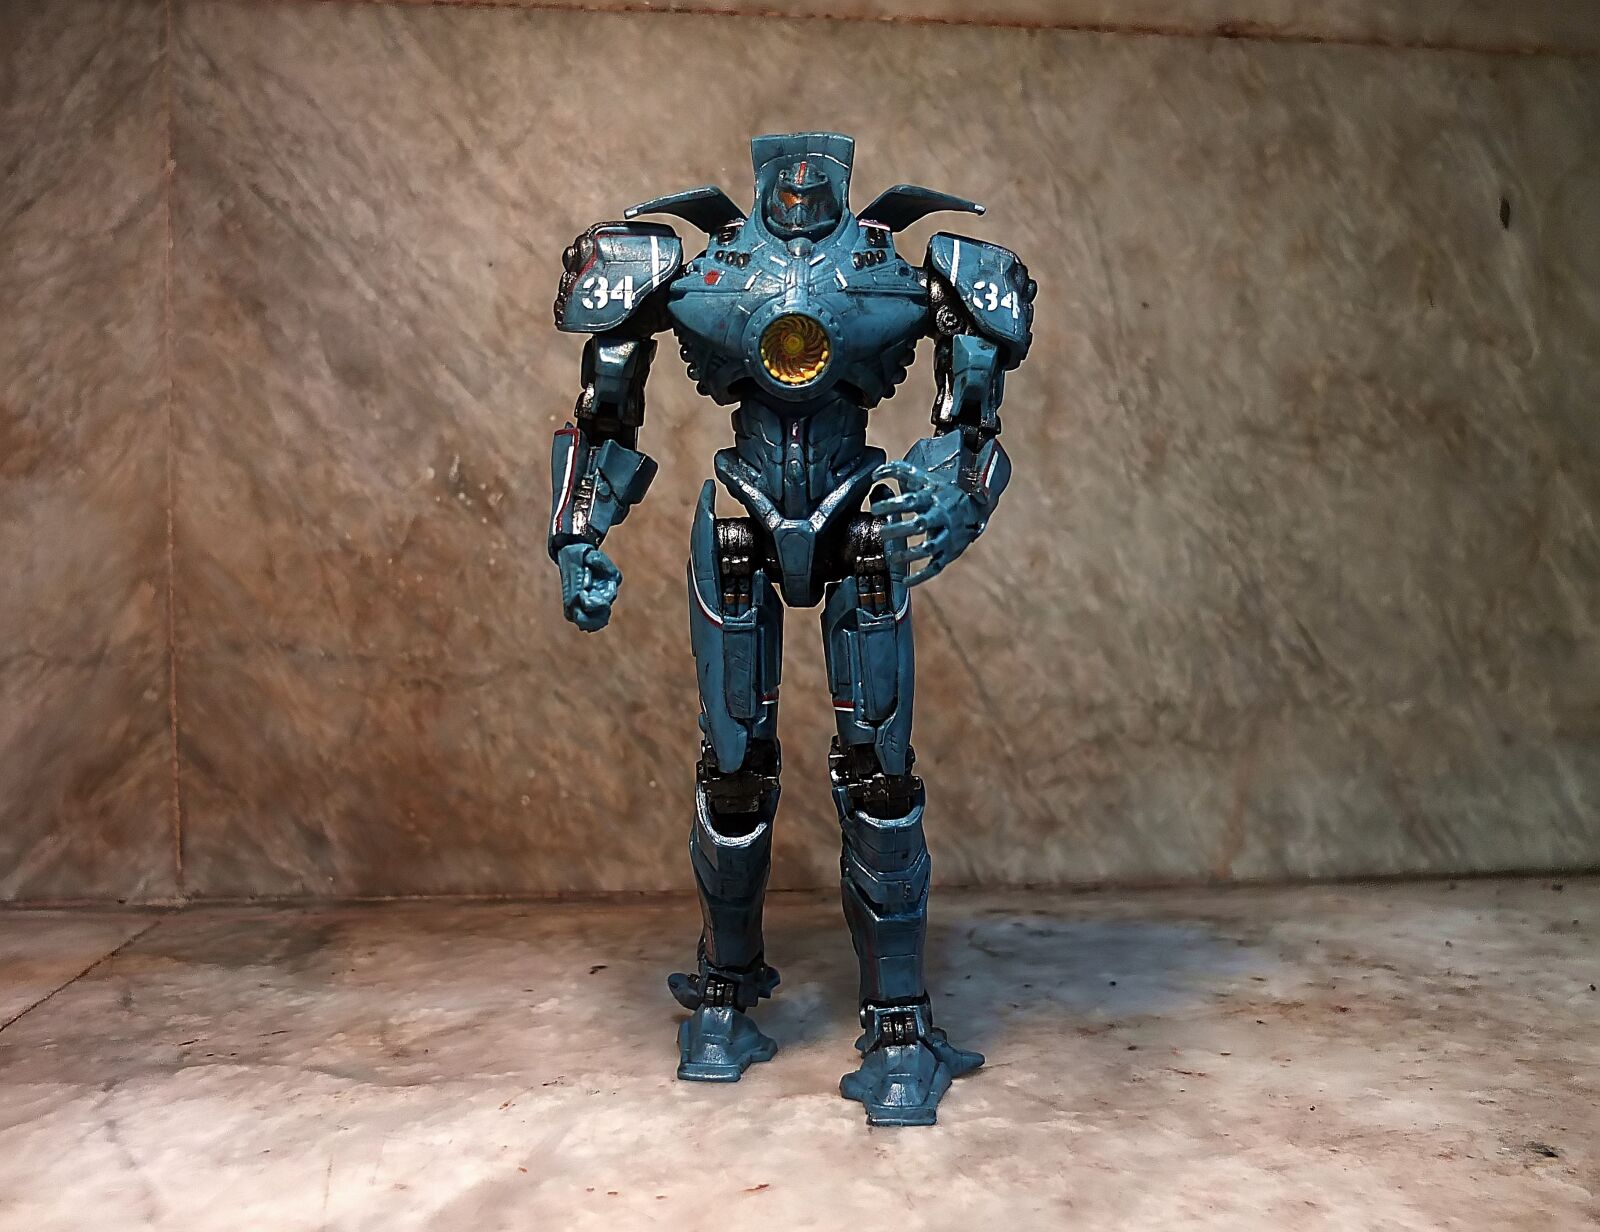 Fujifilm X10 sample photo. Robot toy, painted, plastic photography